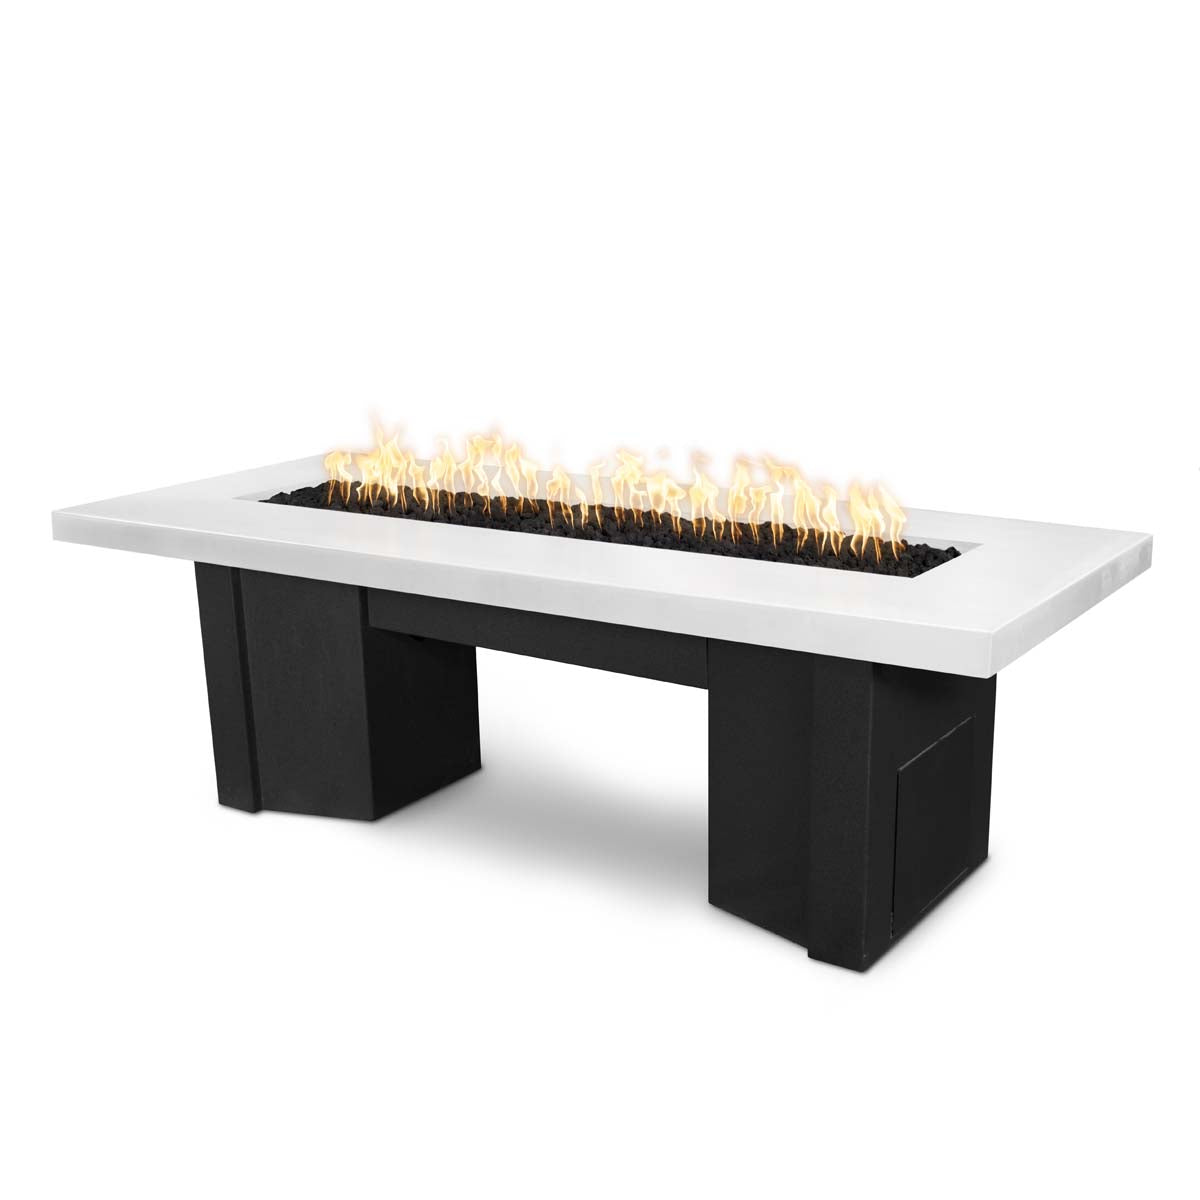 The Outdoor Plus Rectangular Alameda 60" Black & White Powder Coated Liquid Propane Fire Pit with Match Lit Ignition